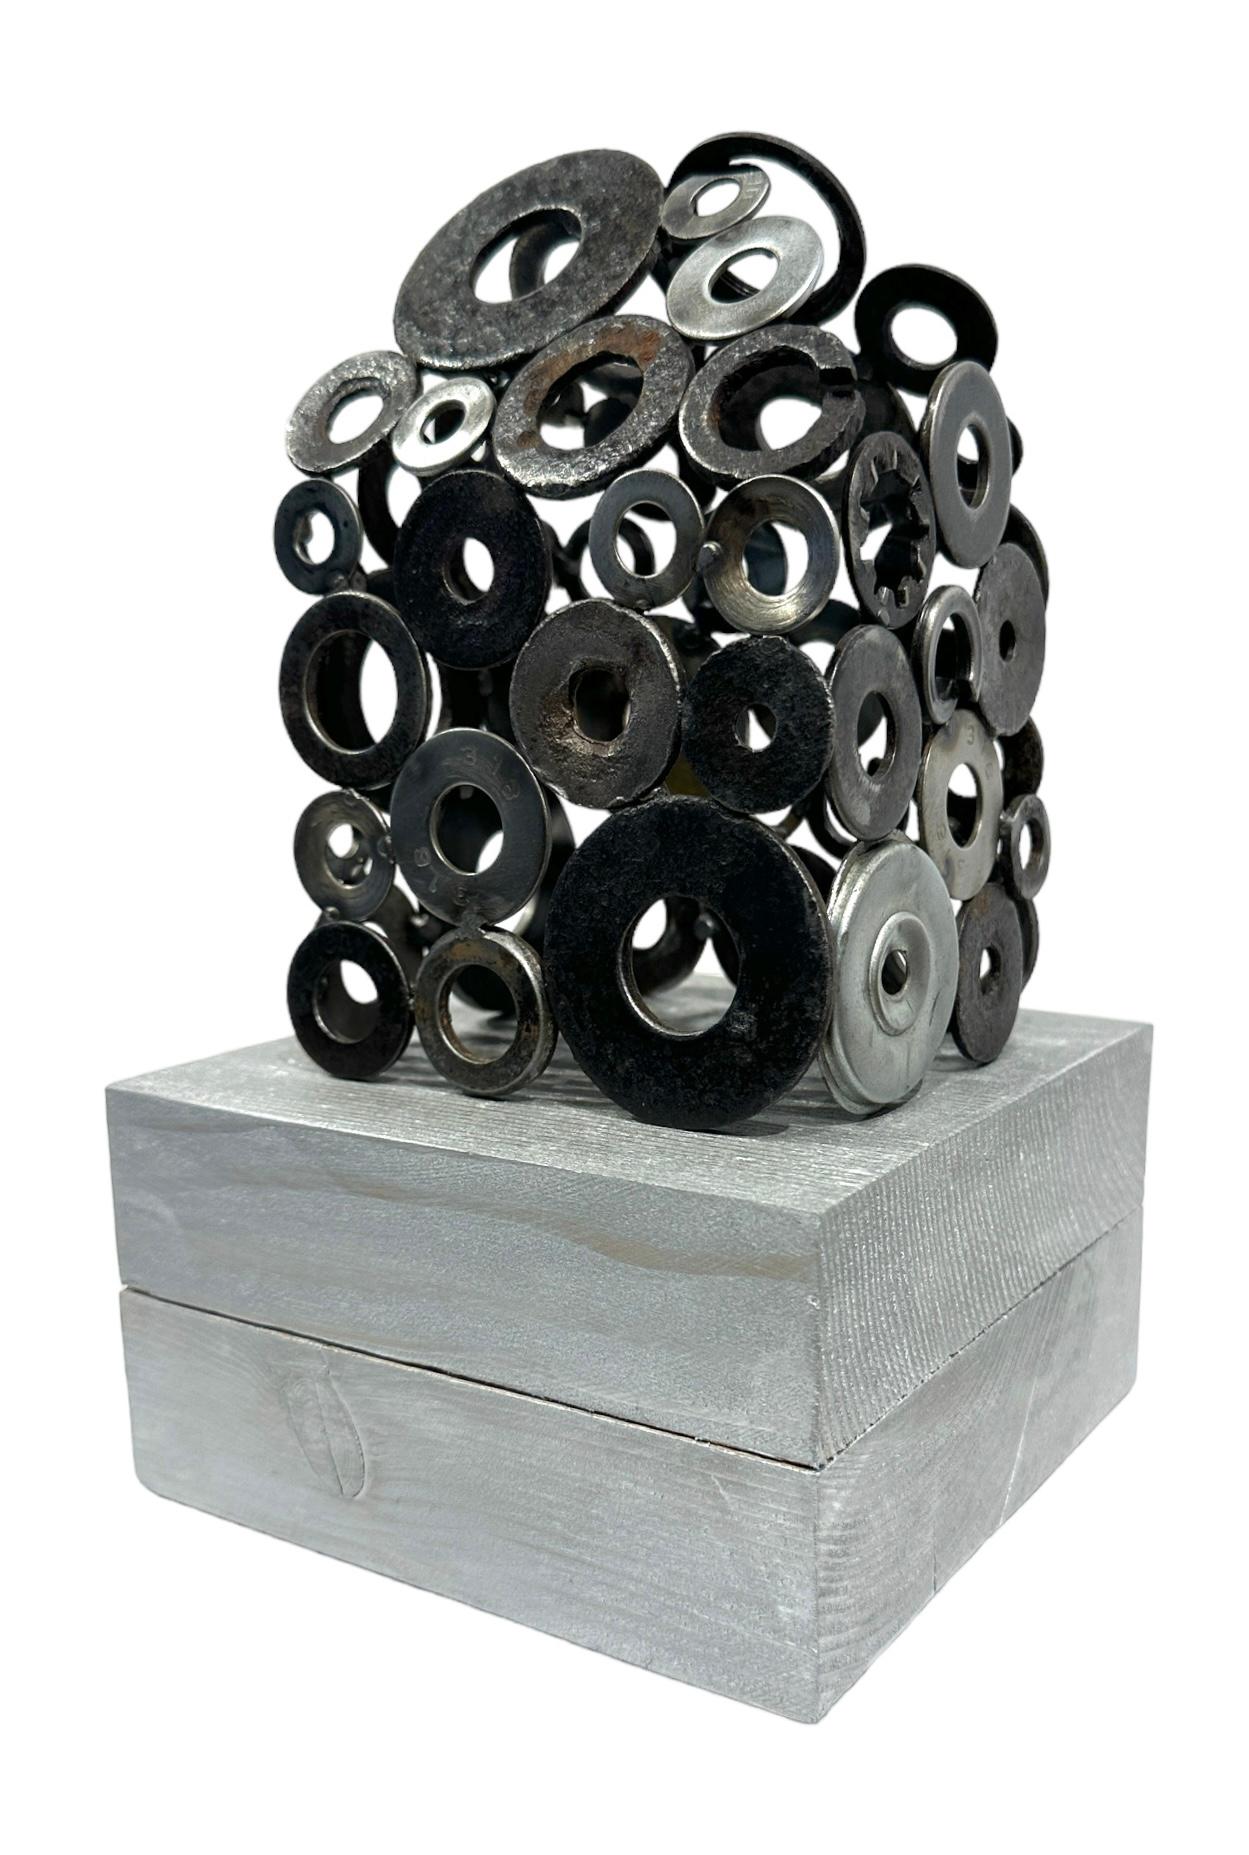 American Jim Rose - Construct No. 02, Salvaged Steel and Aluminum Industrial Objects For Sale